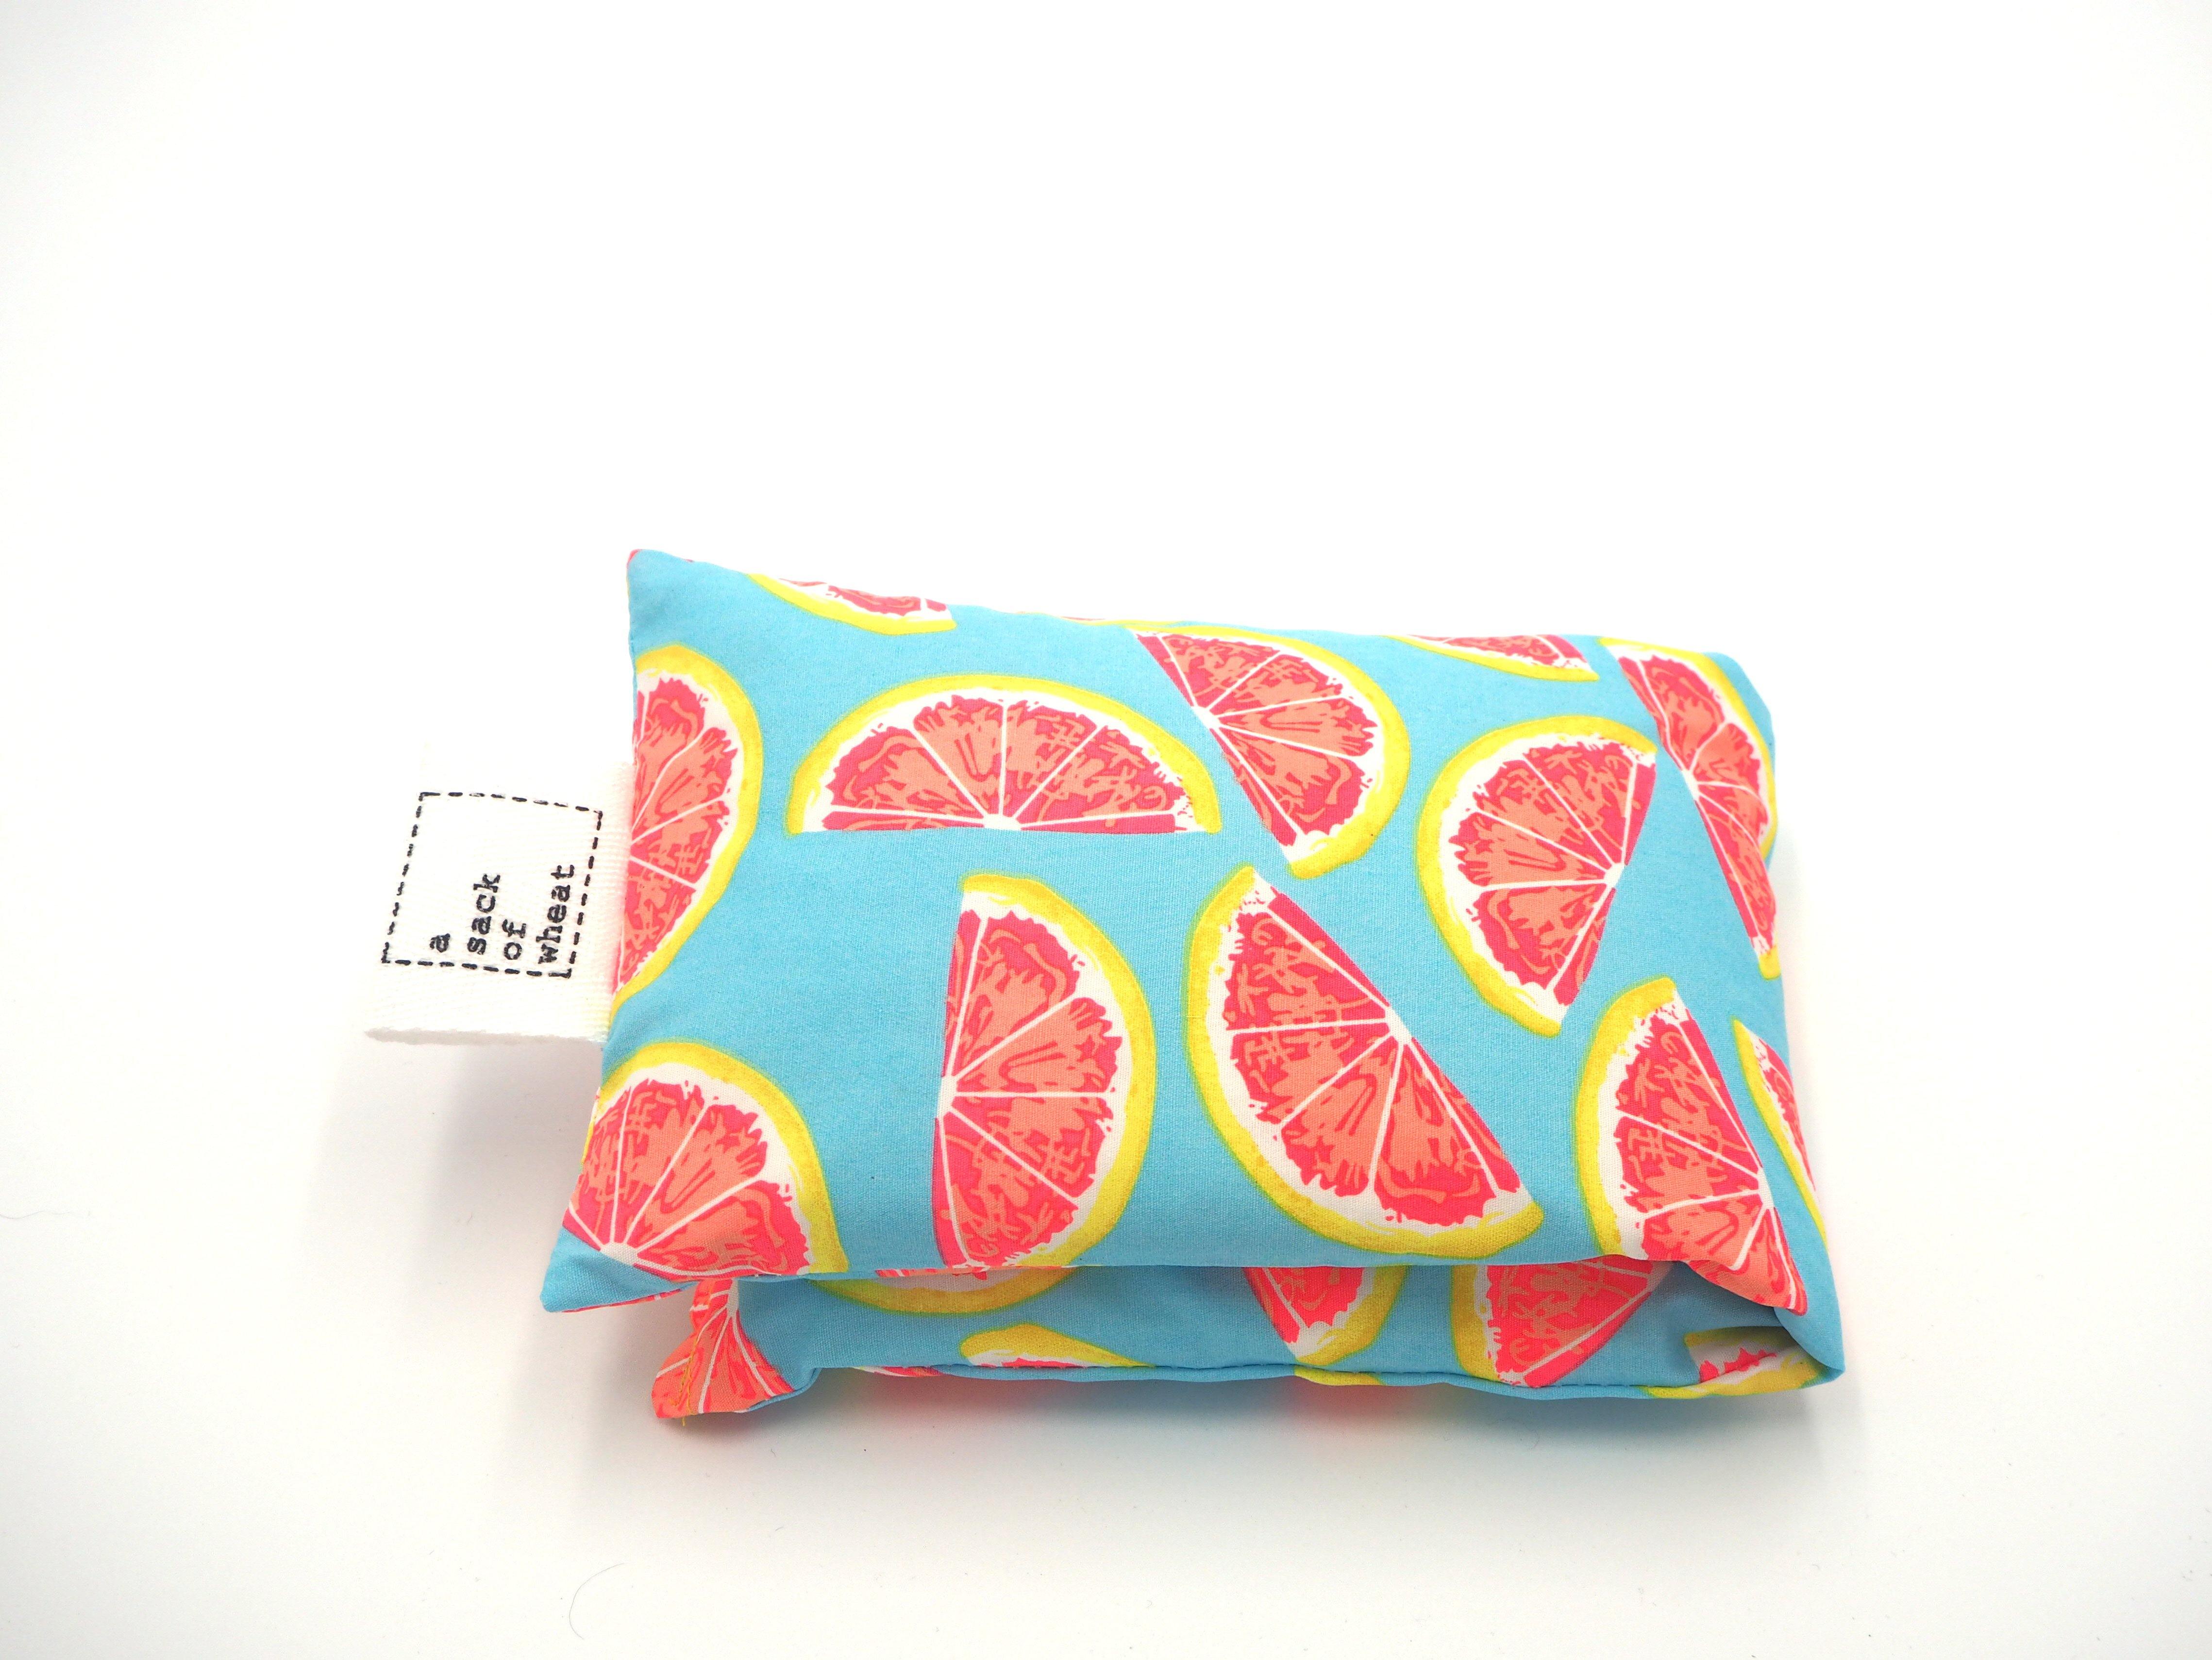 Folded view of A Sack Of Wheat, with slices of citrus fruit print on 100% cotton fabric